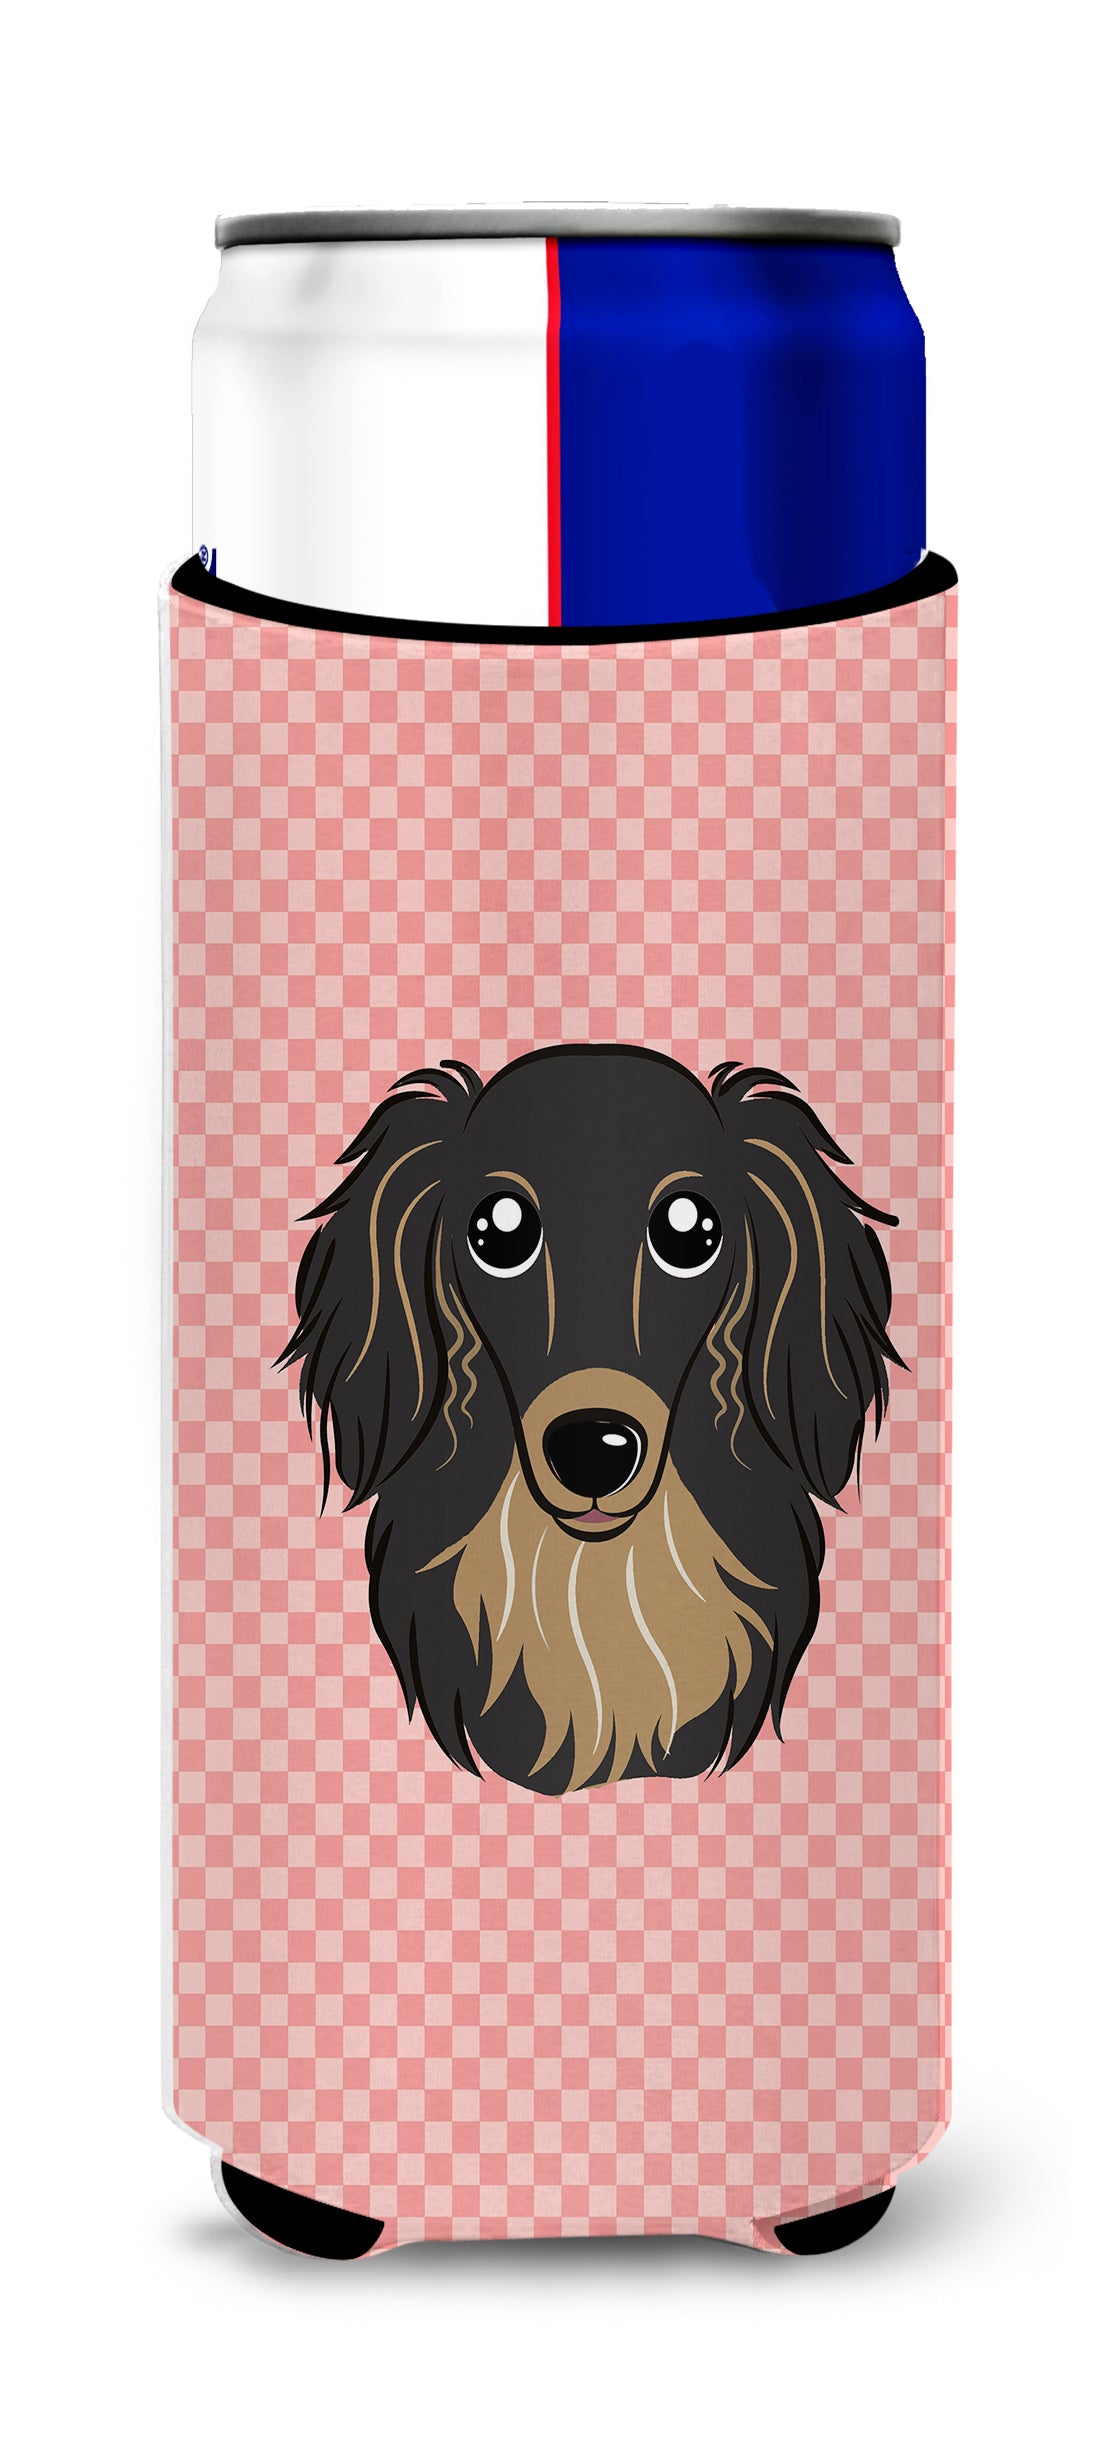 Checkerboard Pink Longhair  Dachshund Ultra Beverage Insulators for slim cans.